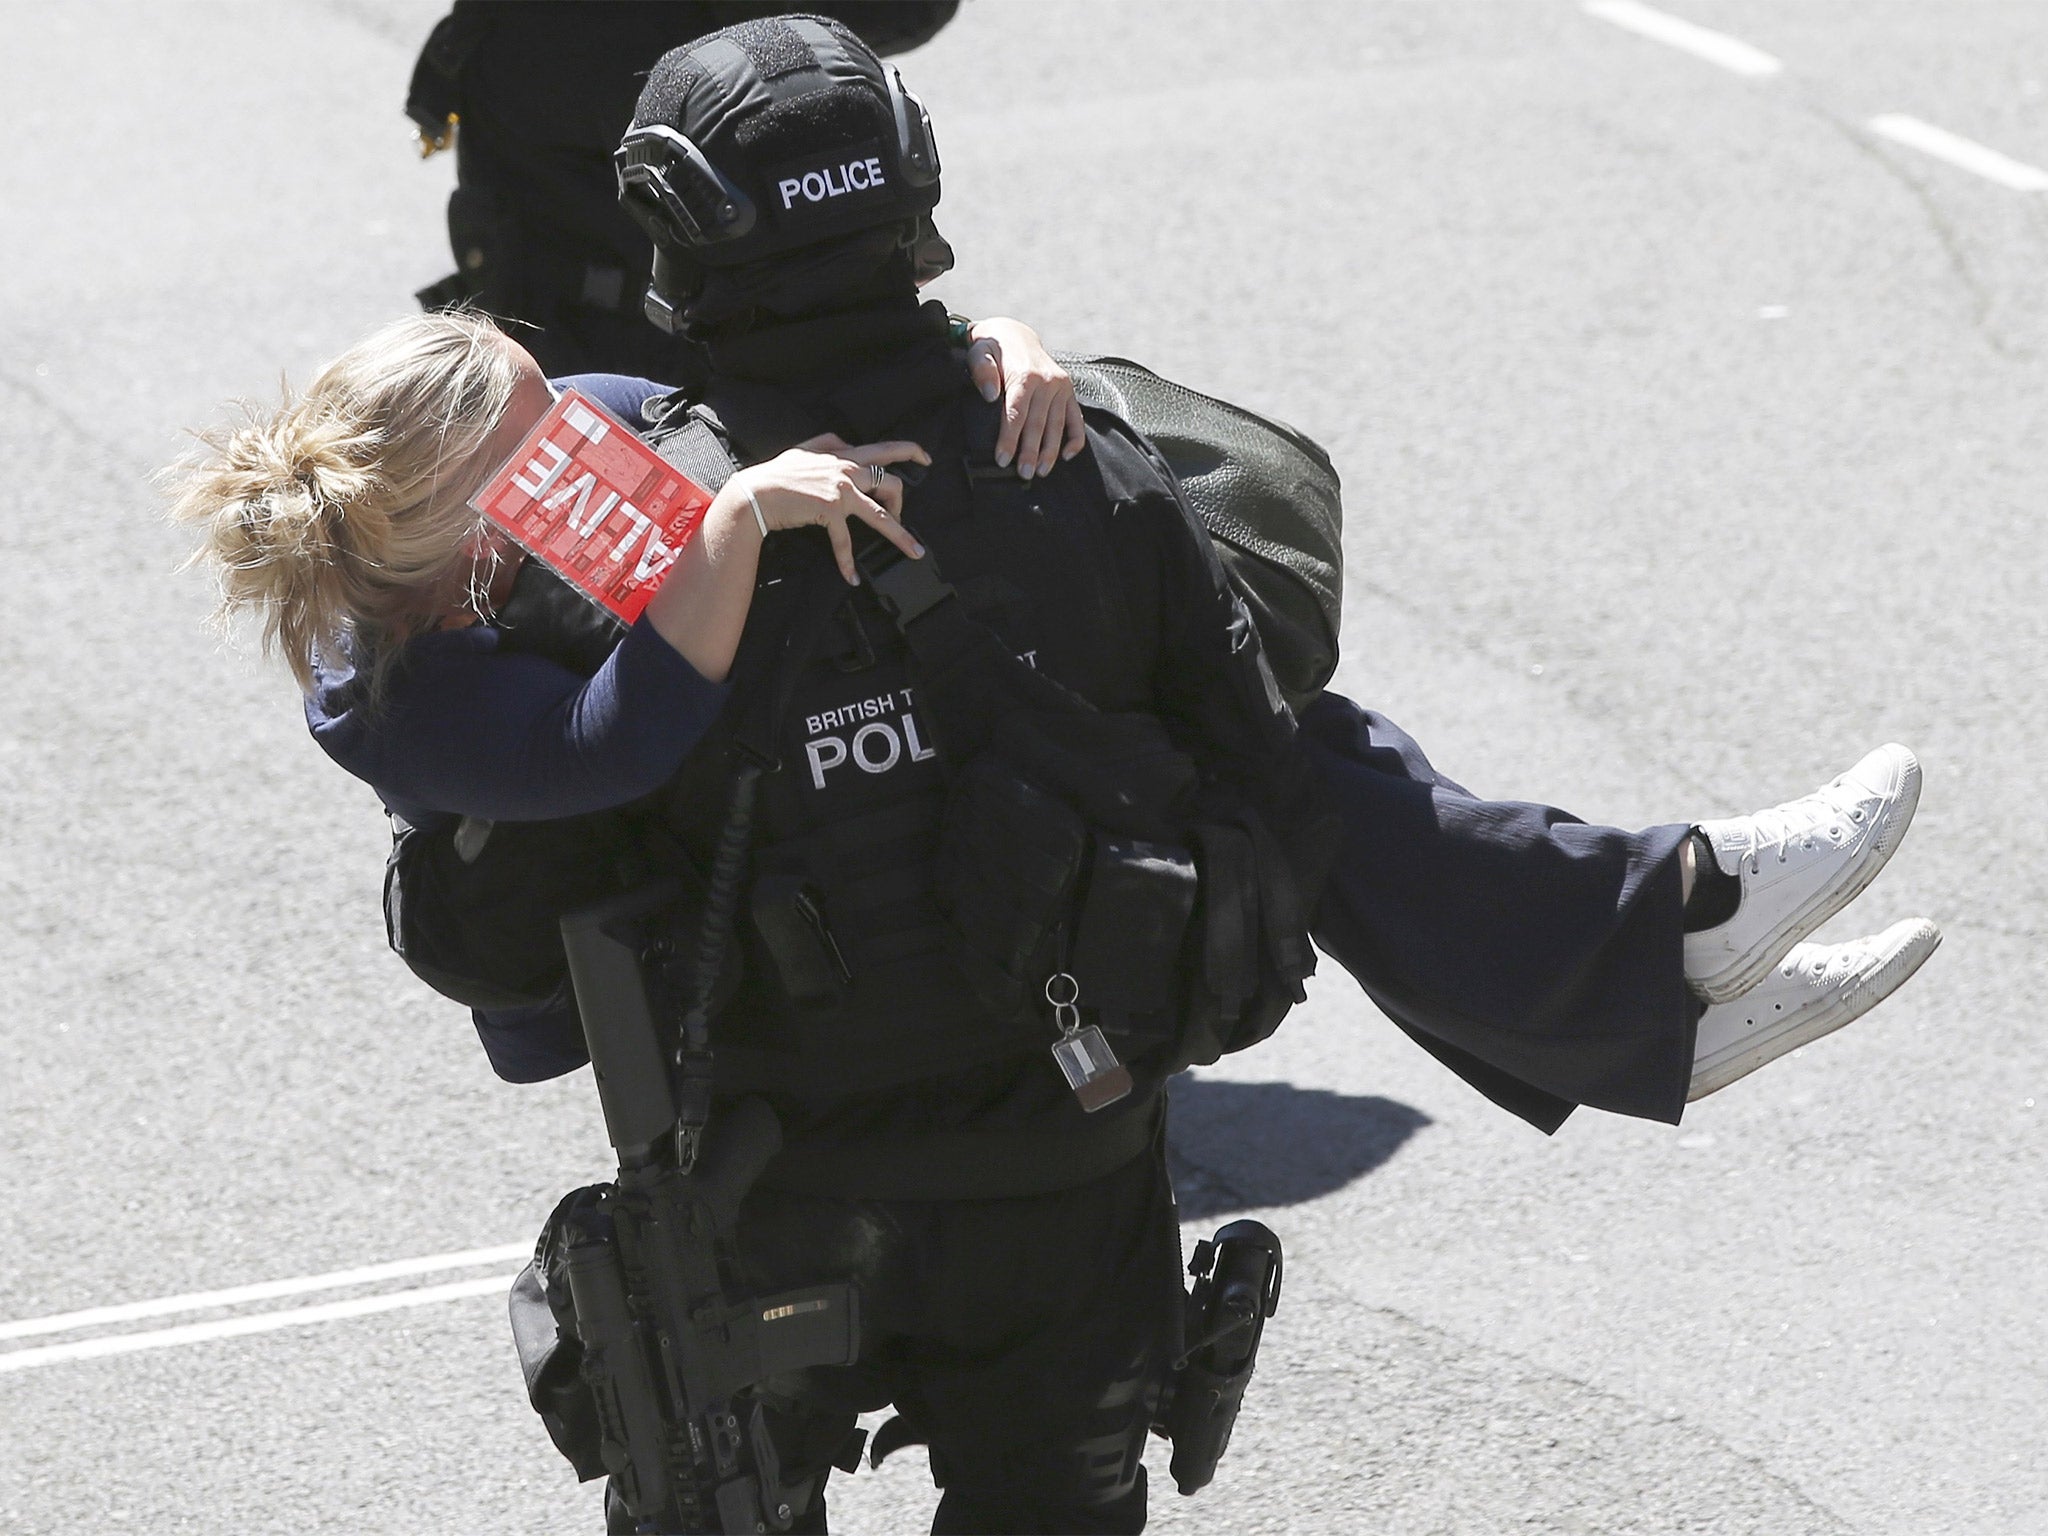 A police officer carries a casualty to safety